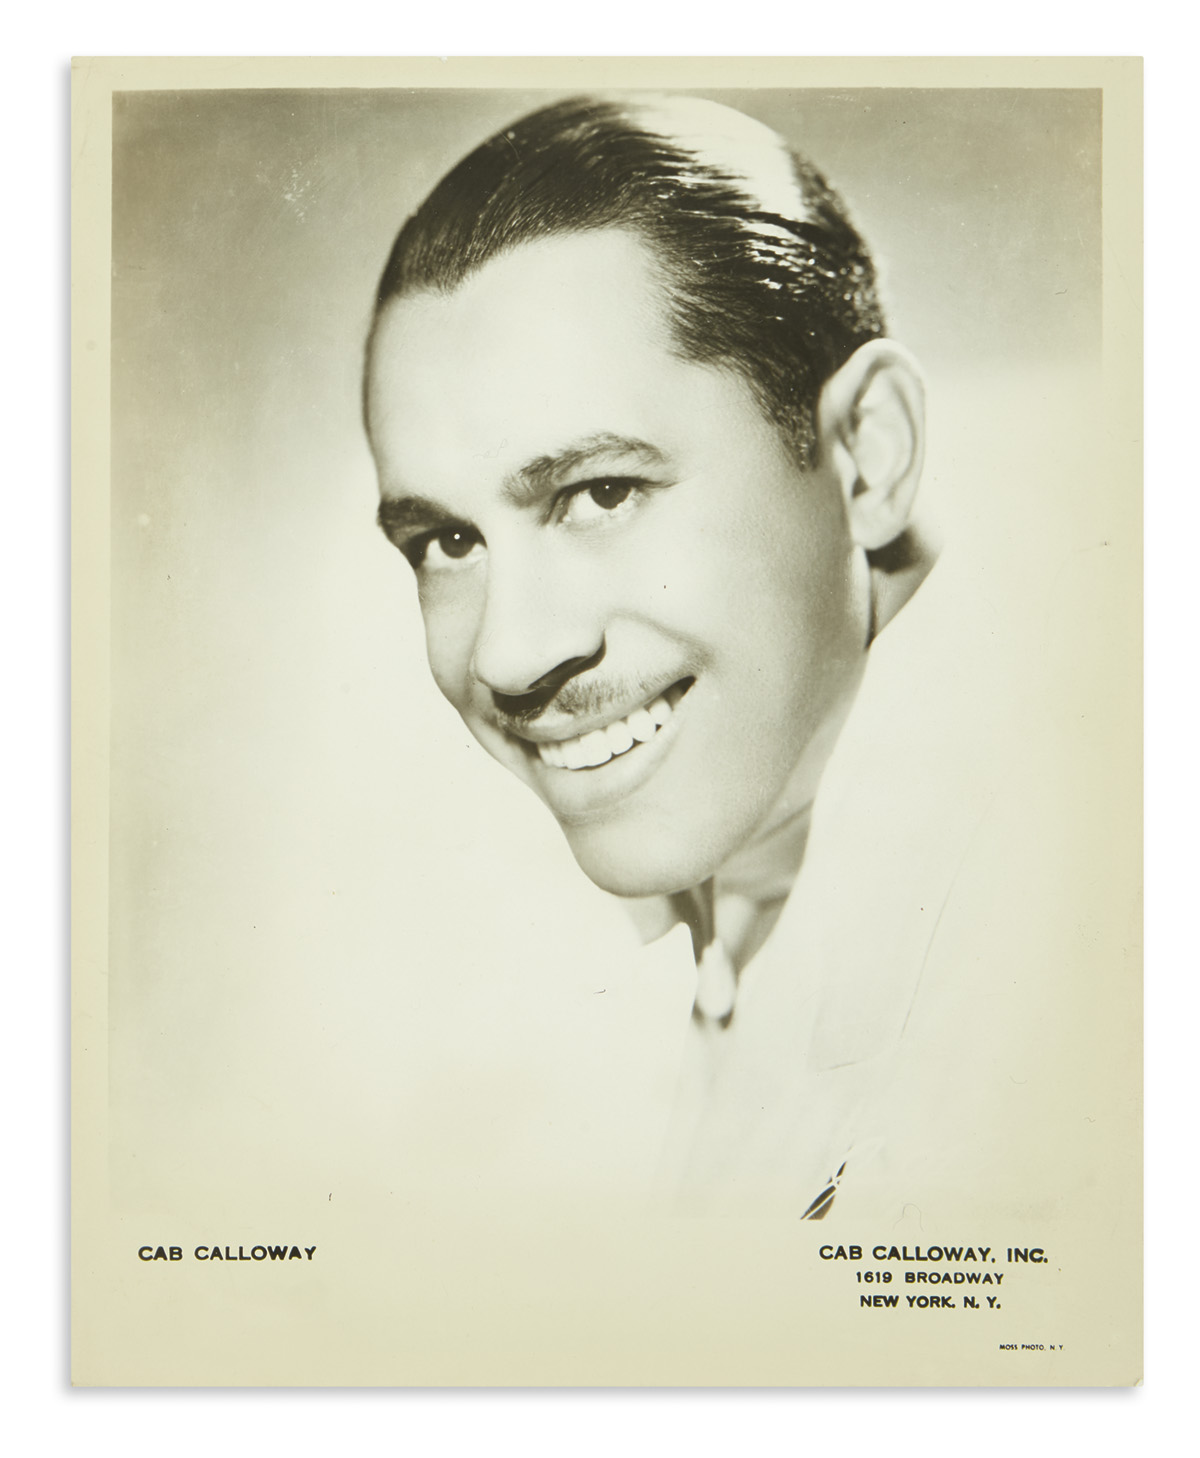 (MUSIC.) Group of promotional photographs of musicians and entertainers including Cab Calloway and Harry Belafonte.